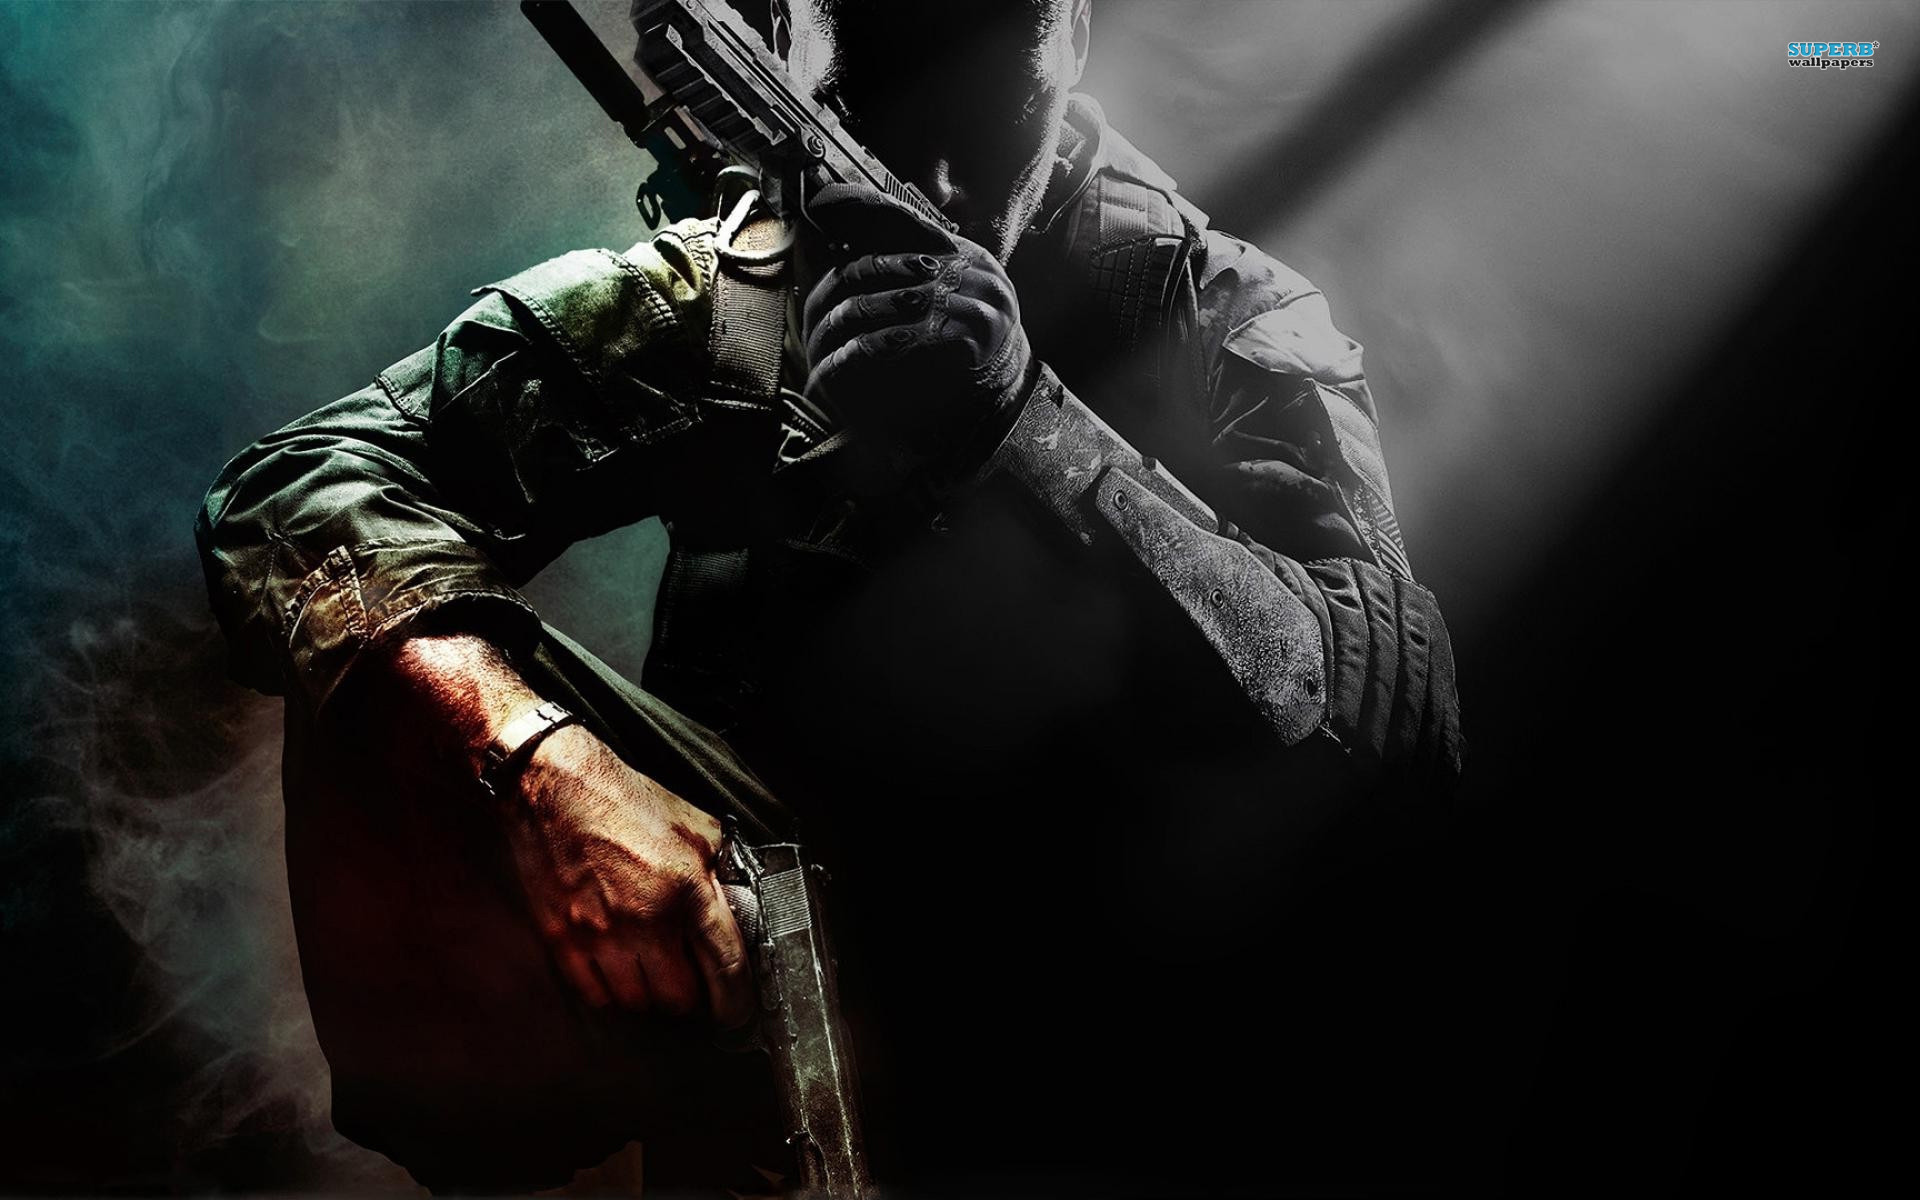 Call Of Duty Black Ops 2 Wallpaper Images #3887 Wallpaper ...